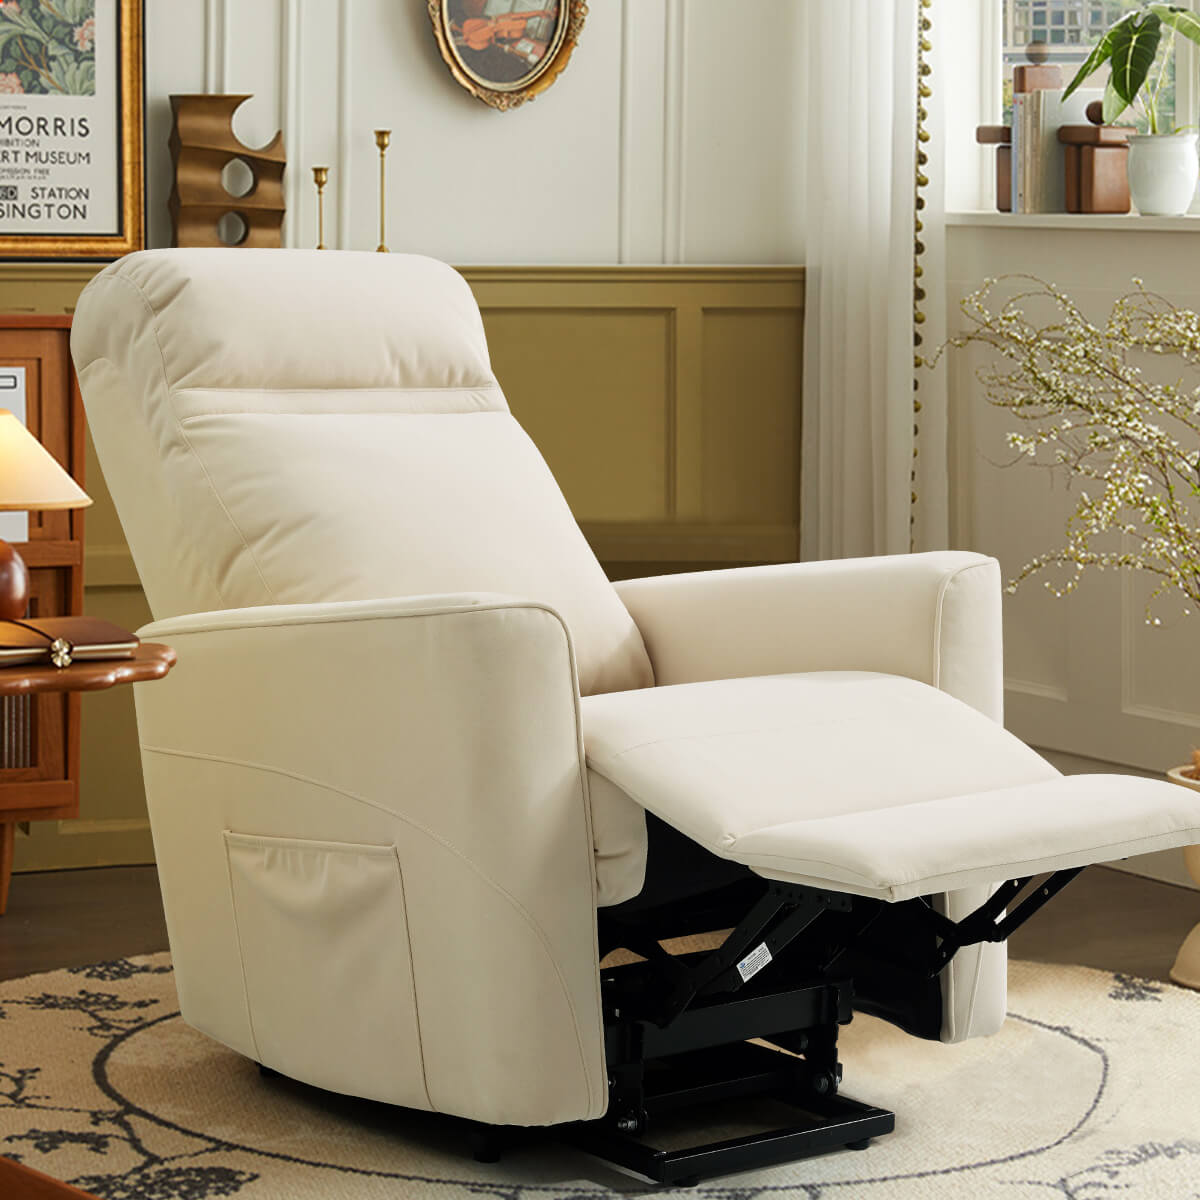 Soulout 8022 Power Lift Chair with Kneading Massage beige reclining position